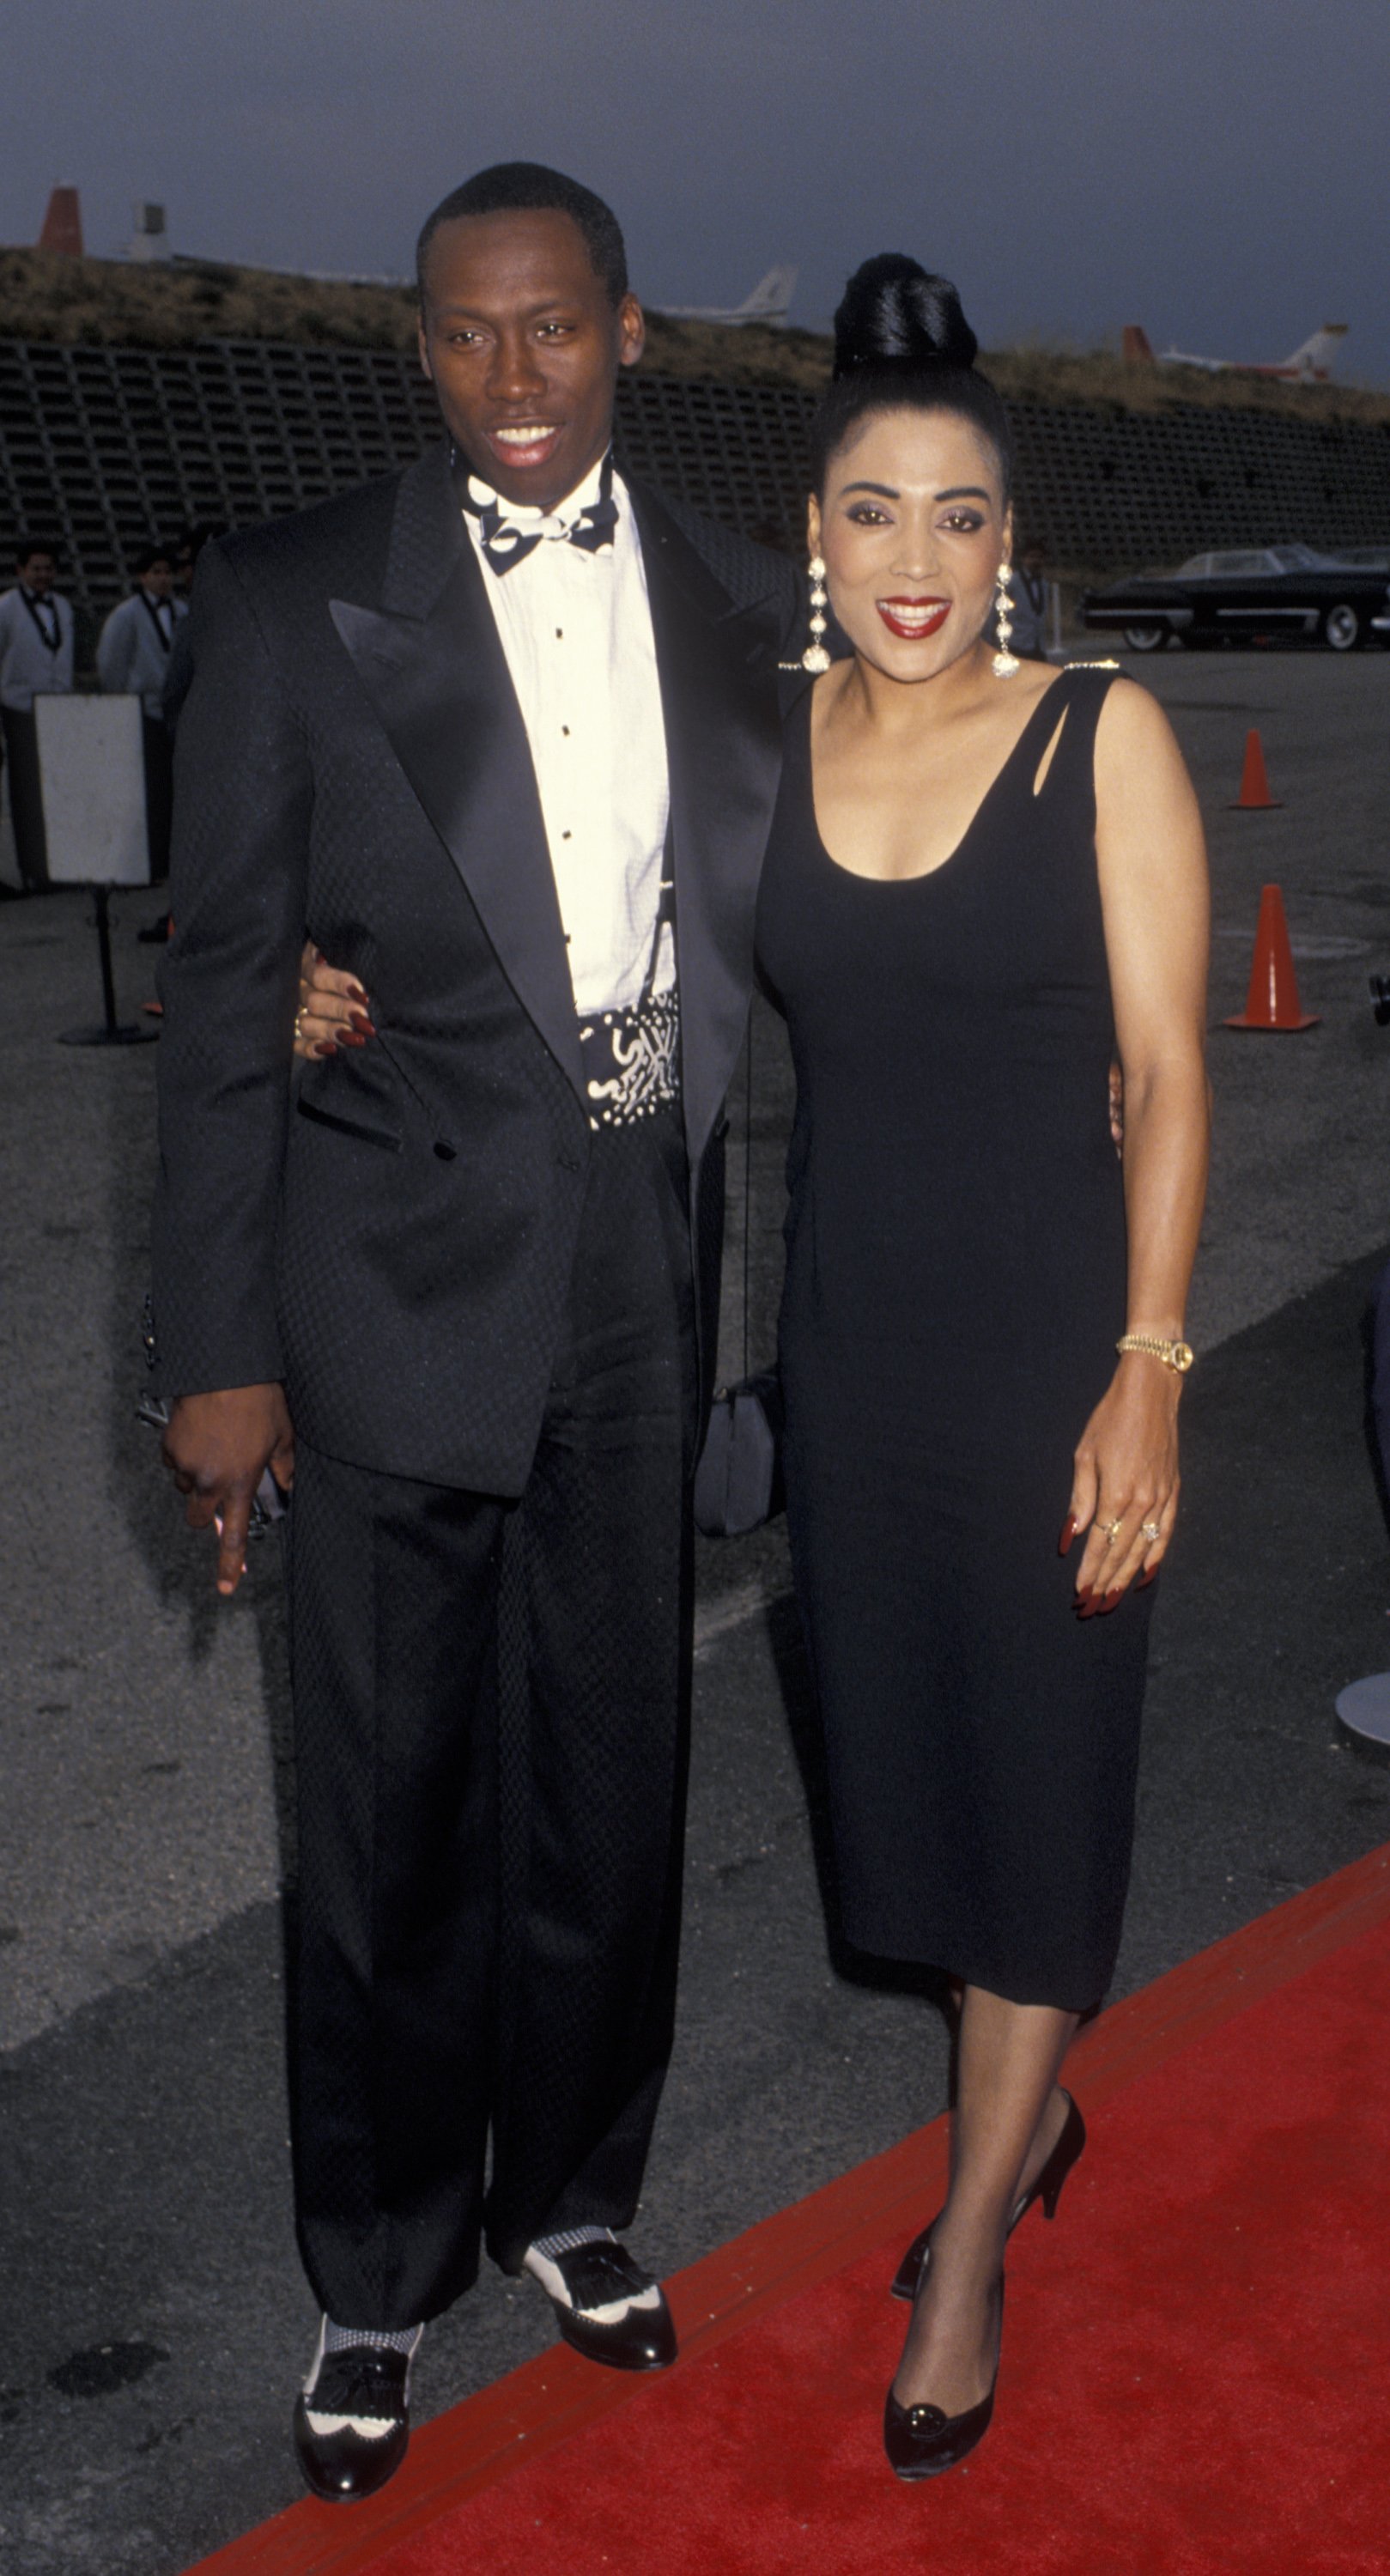 Al Joyner and Florence Griffith-Joyner at The American Television Awards at the Barker Hanger at Santa Monica Airport in Santa Monica, California on May 23, 1993 | Source: Getty Images